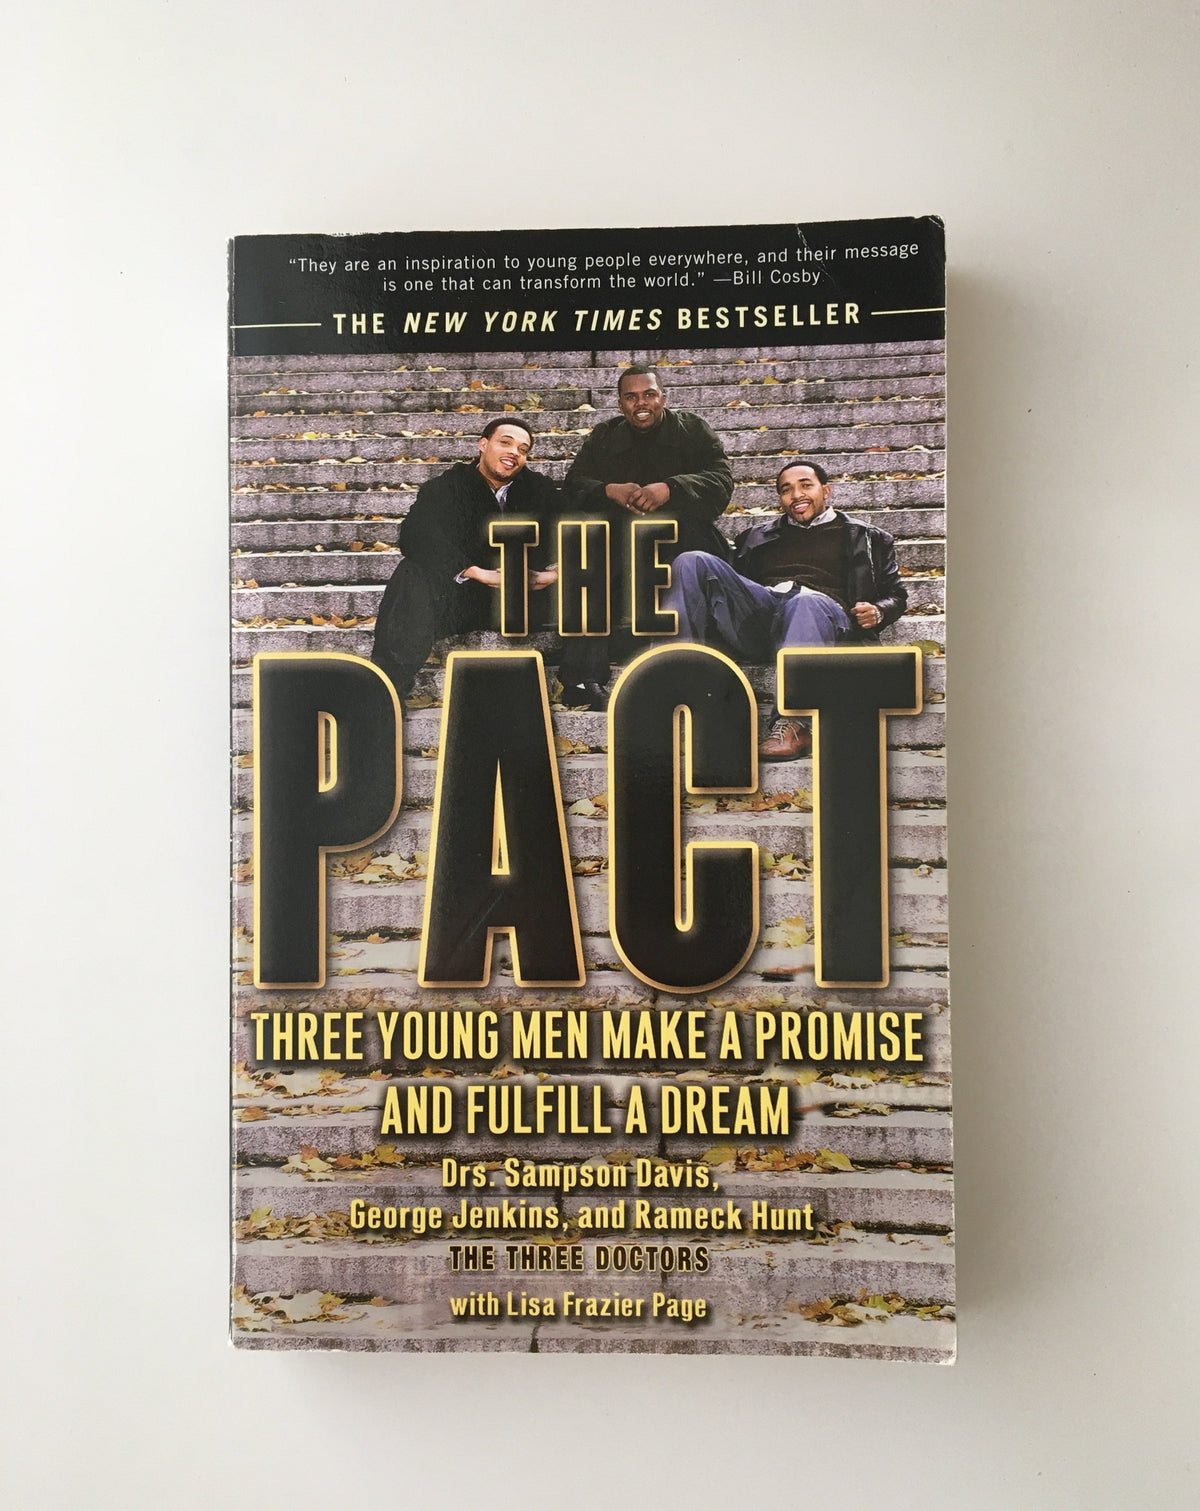 Donate: The Pact: Three Young Men Make a Promise and Fulfill a Dream by Drs. Sampson Davis, George Jenkins and Rameck Hunt